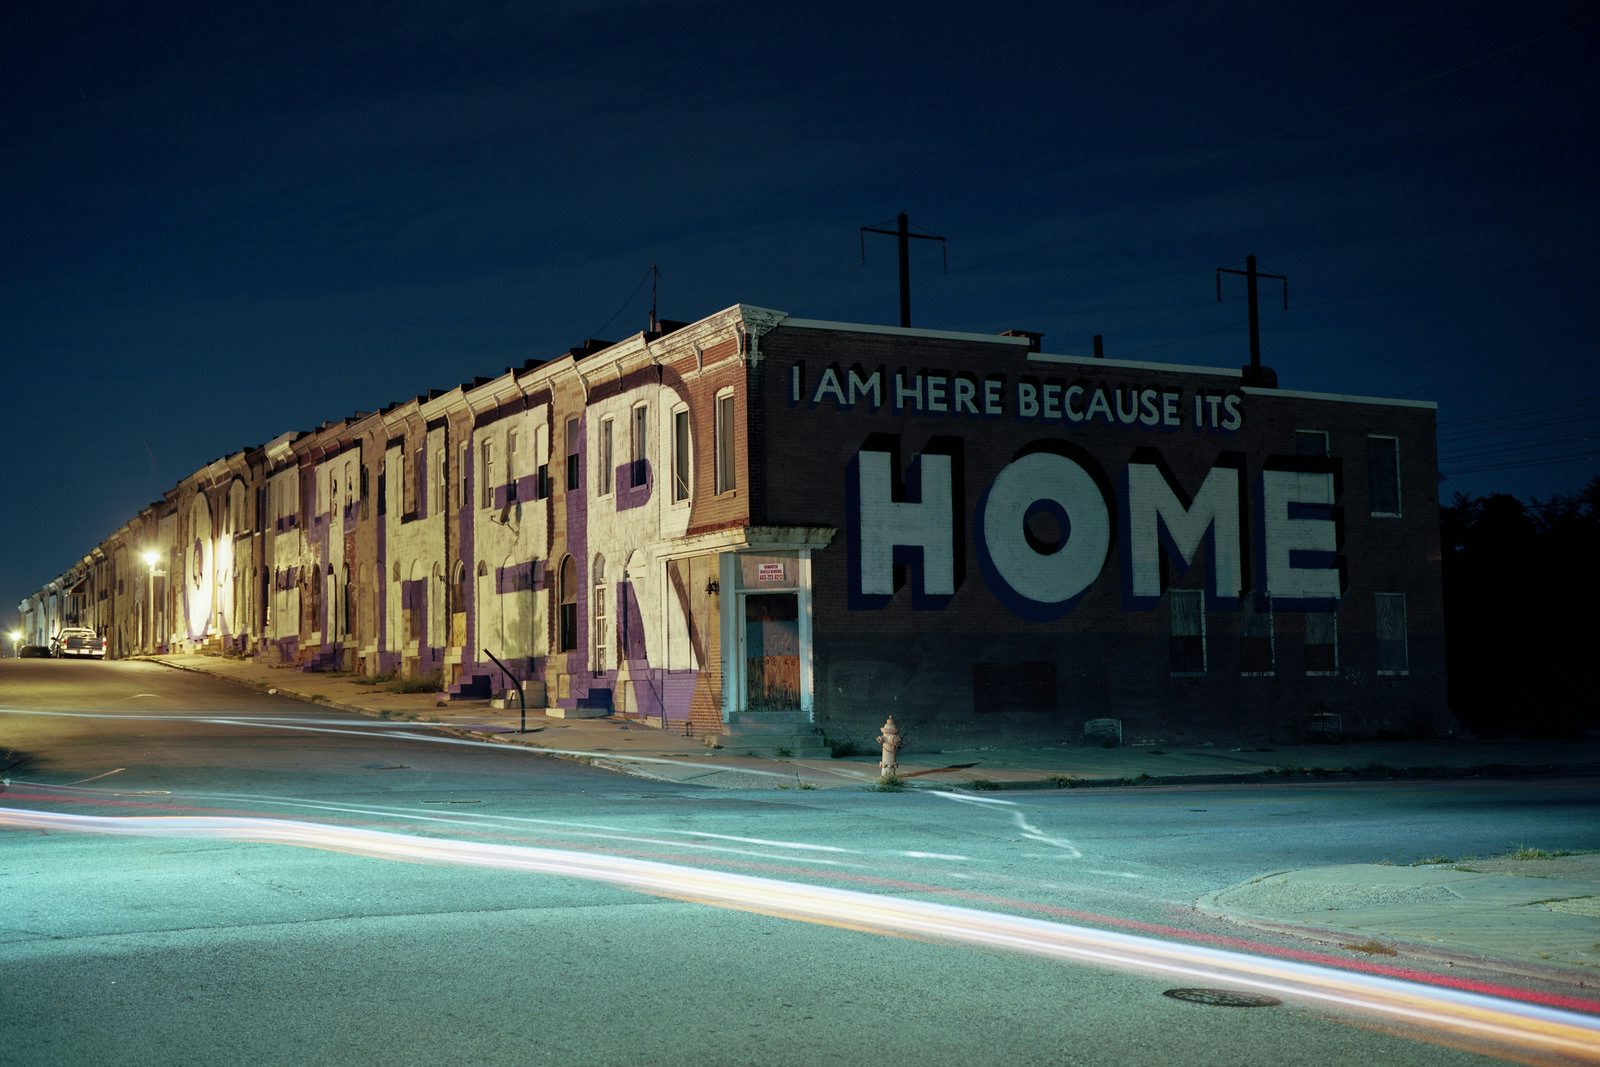 Patrick Joust – Welcome to Baltimore